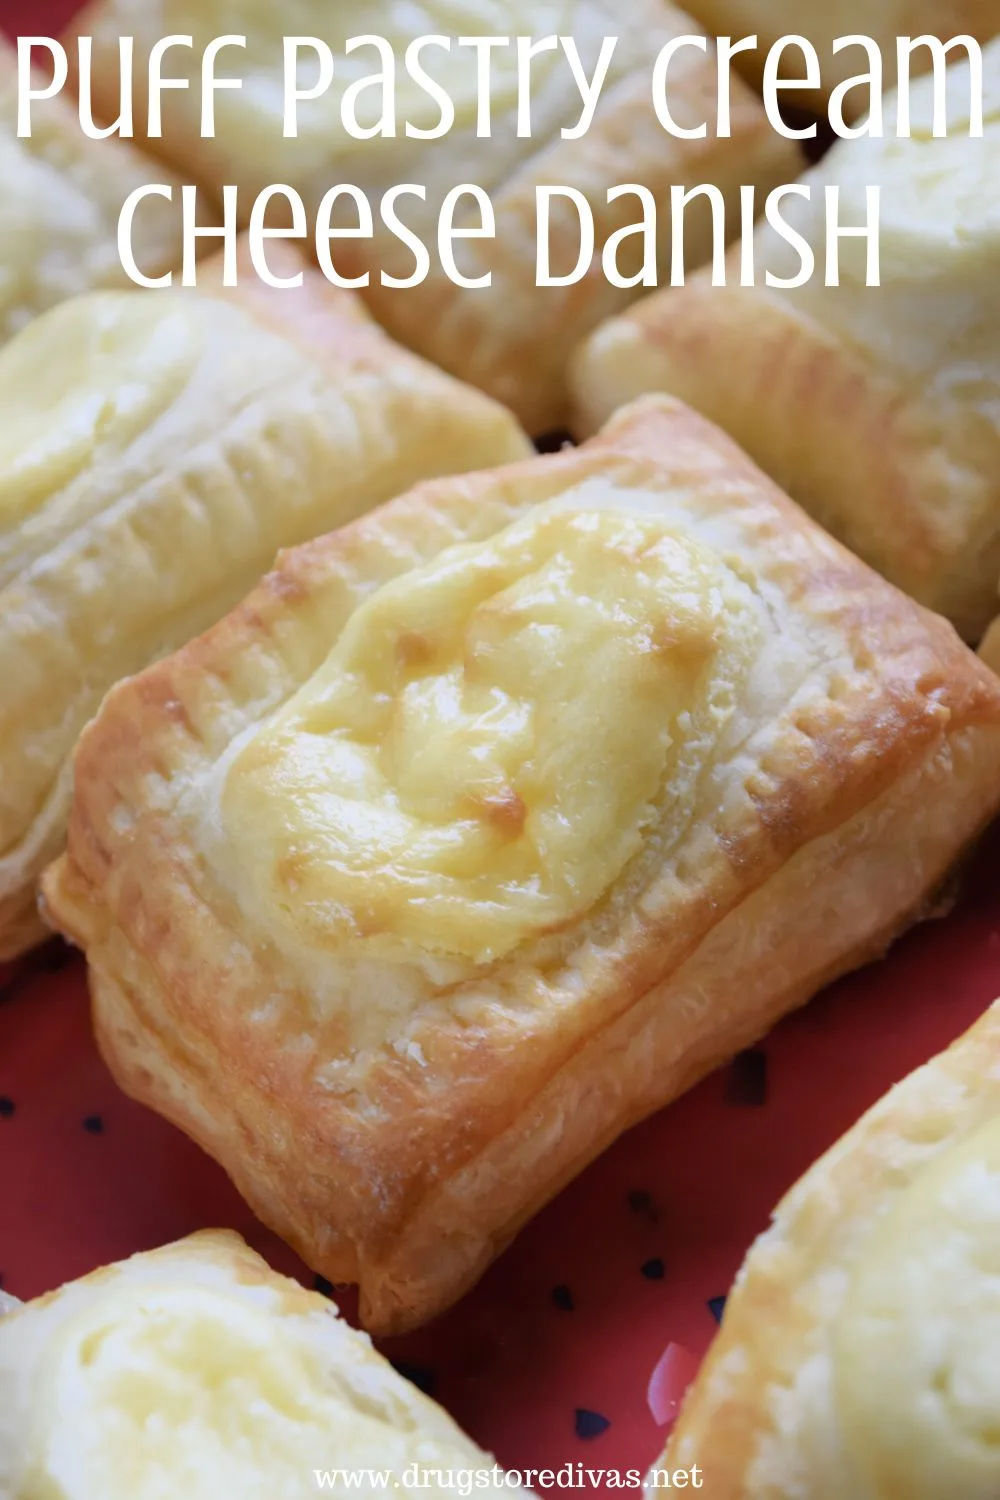 Many pieces of cheese danish with the words 